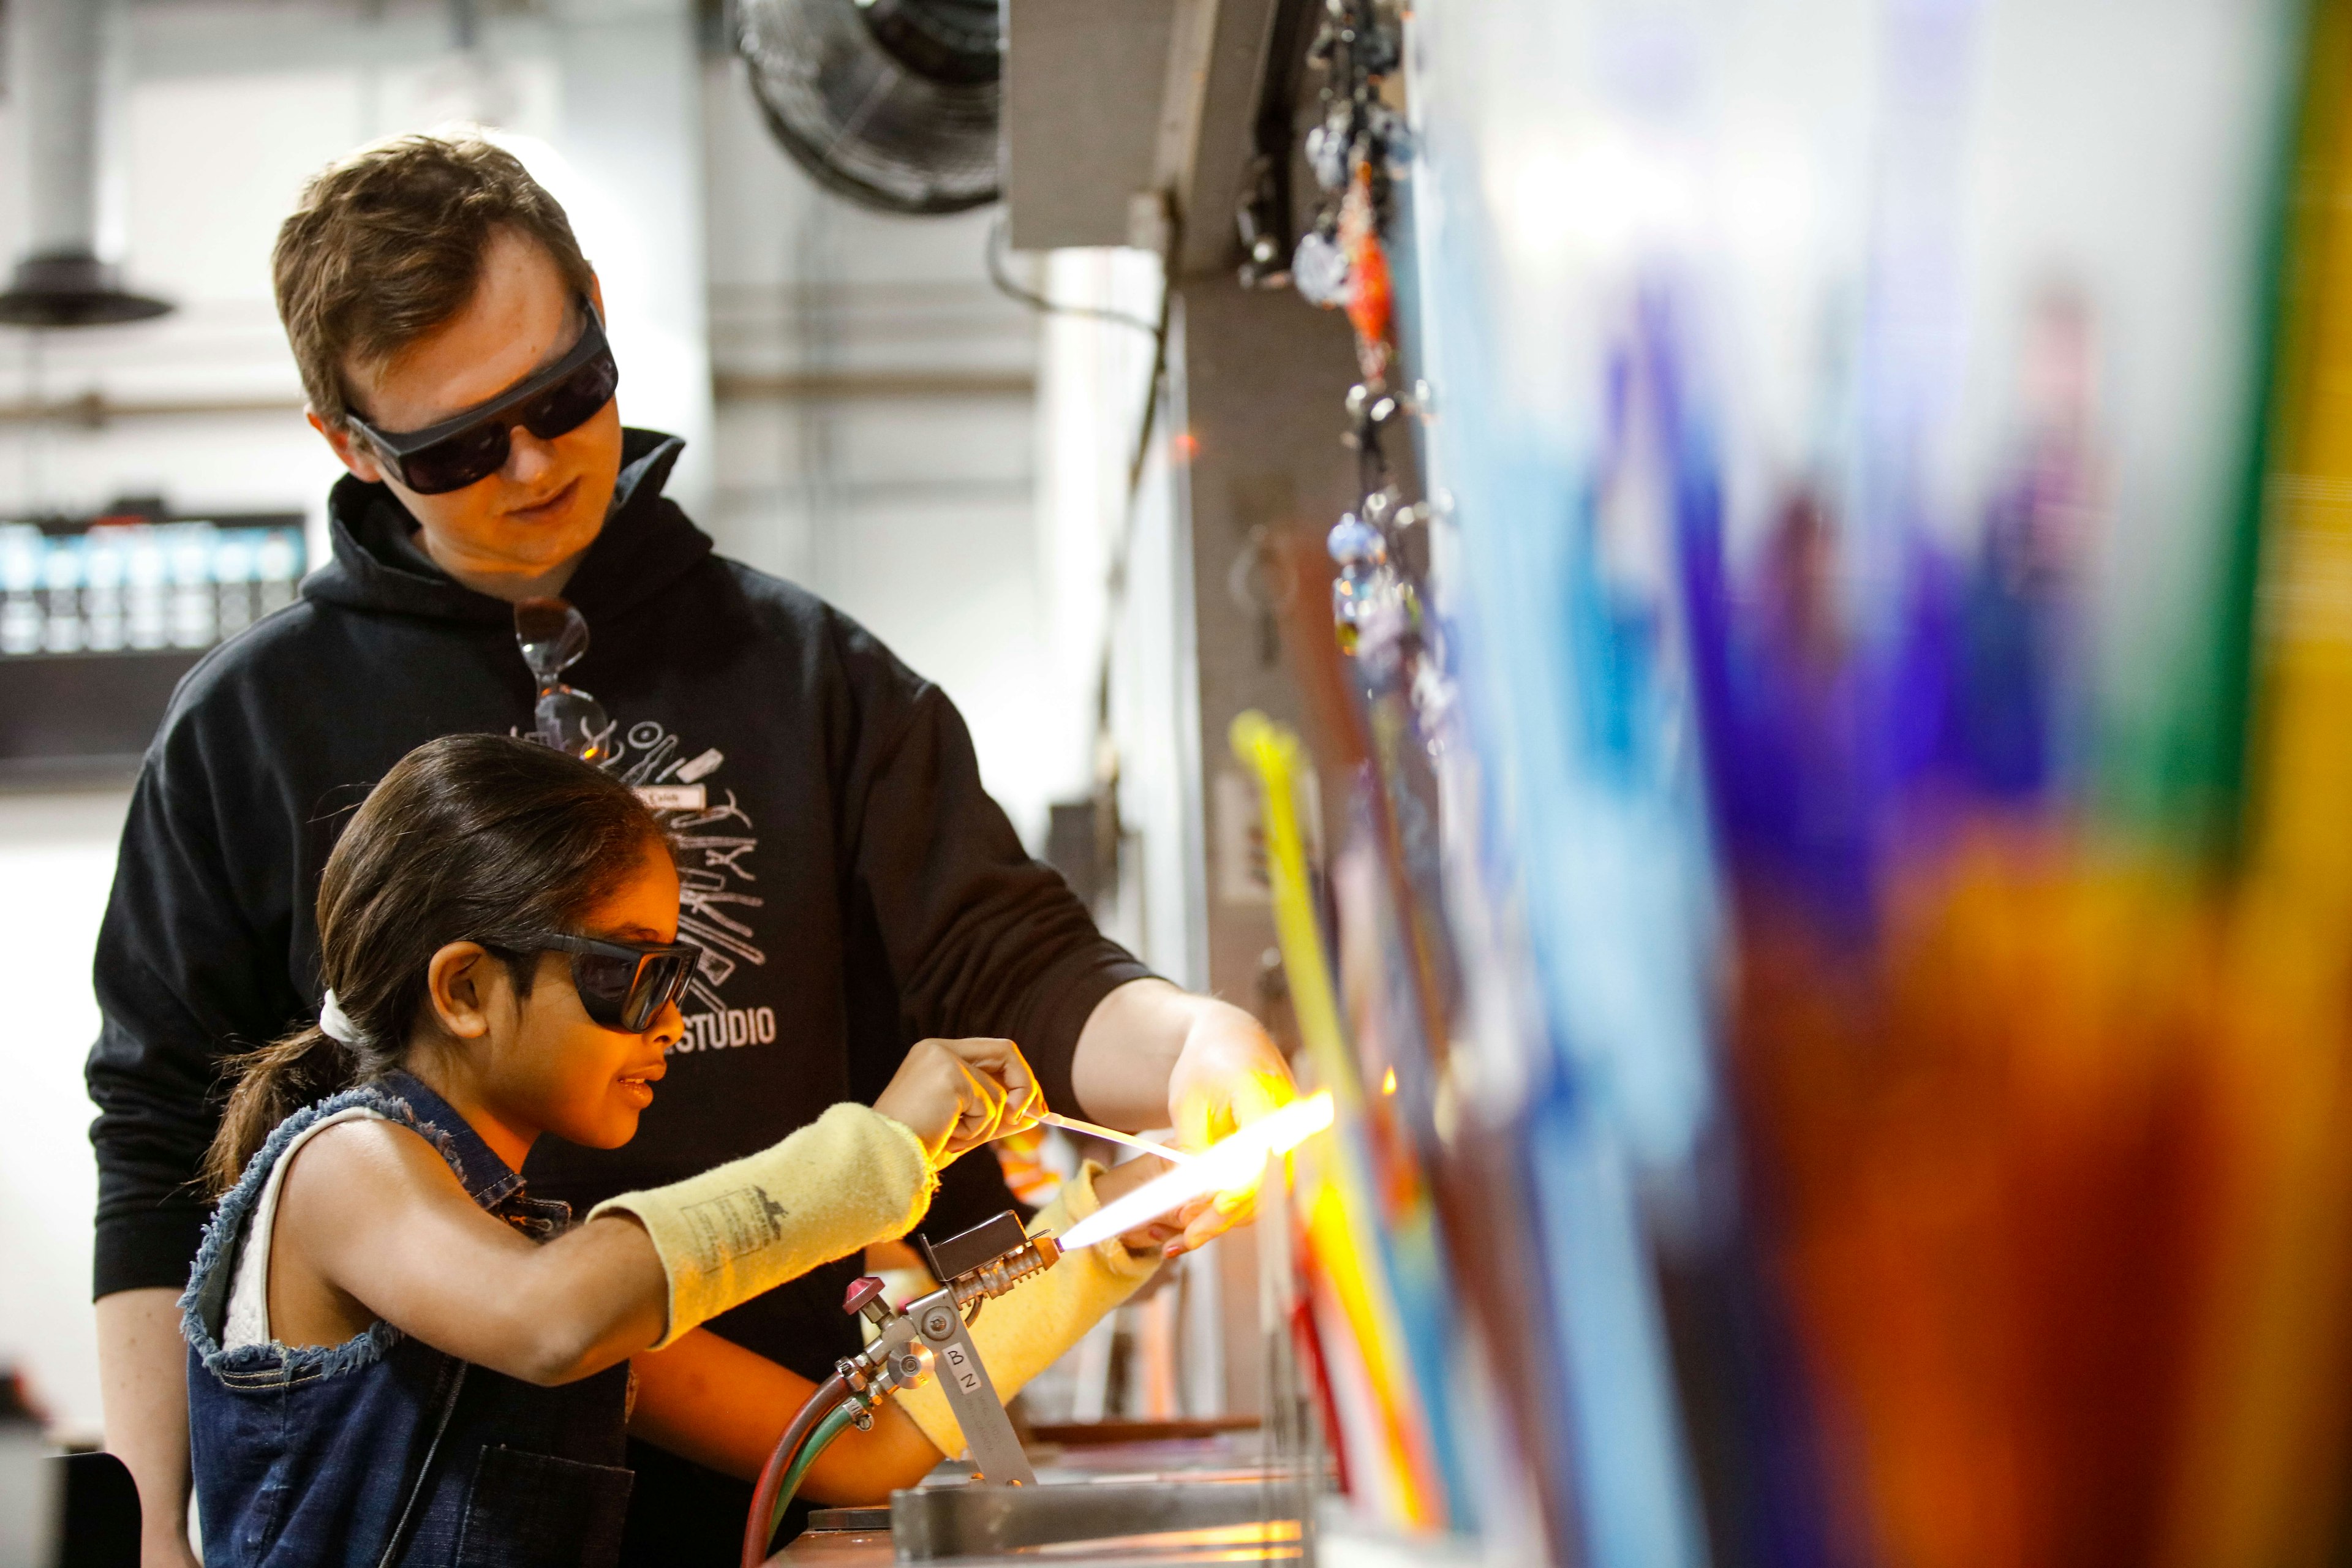 An adult and a kid wearing safety glasses during a Make Your Own Glass - Flameworking class at the Corning Museum of Glass in New York